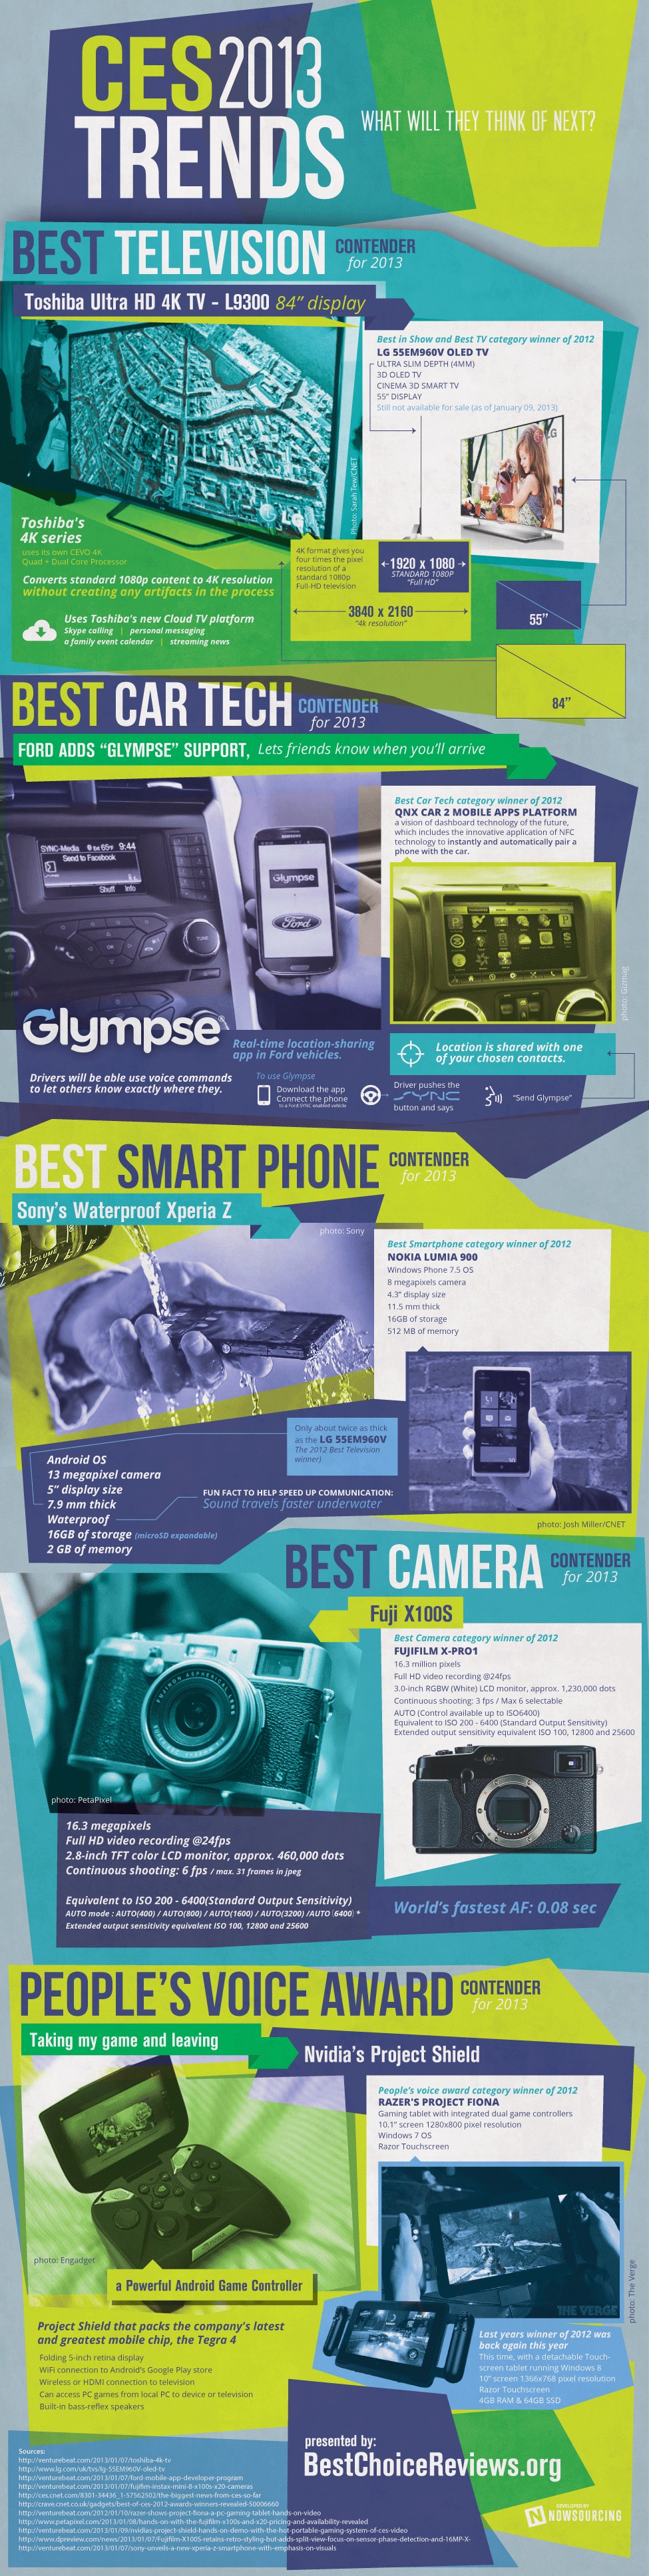 2013 CES Trends infographic